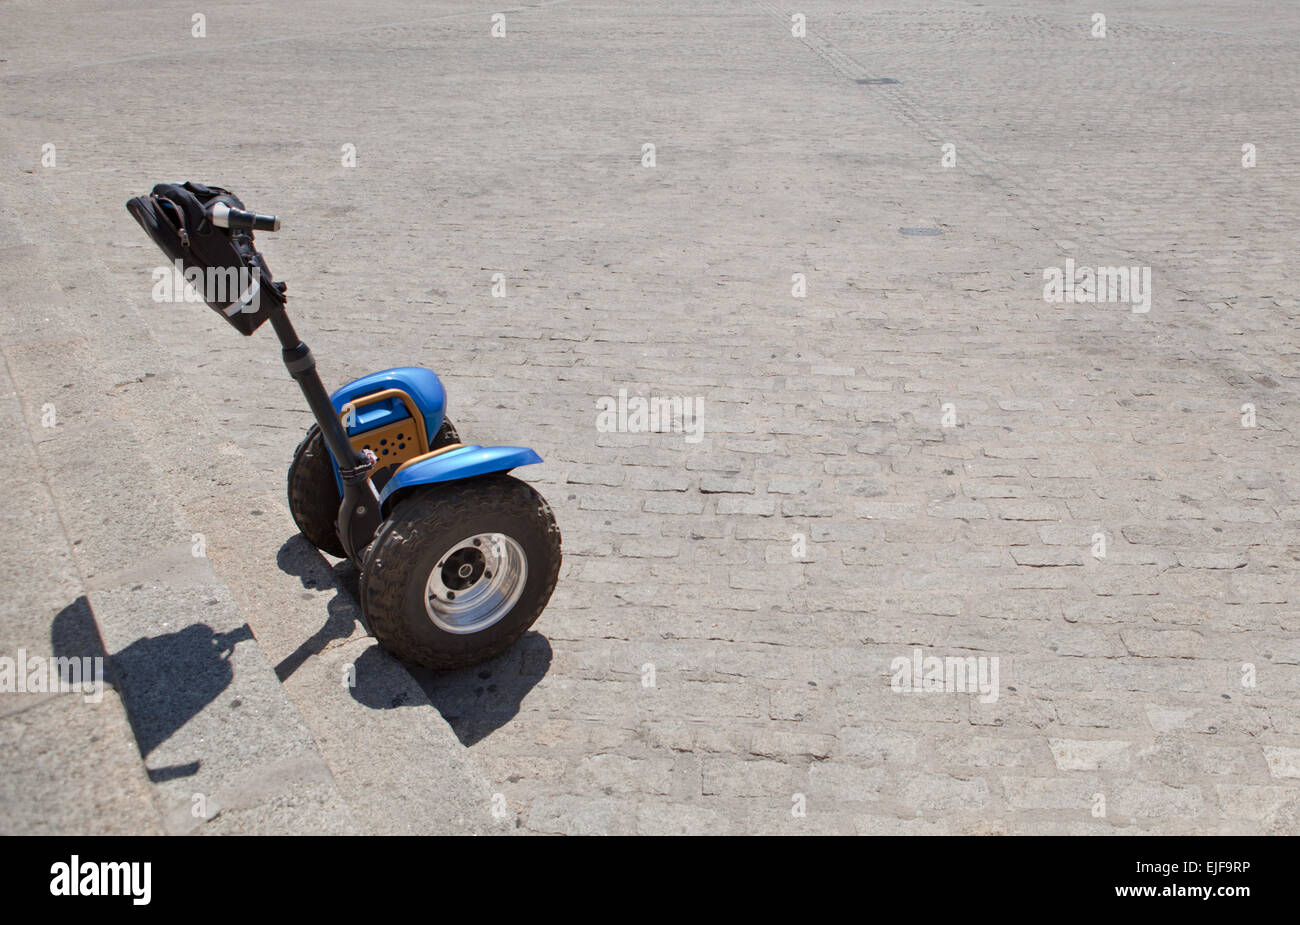 Segways vehicles for rent to tourists at historical square, Spain Stock Photo